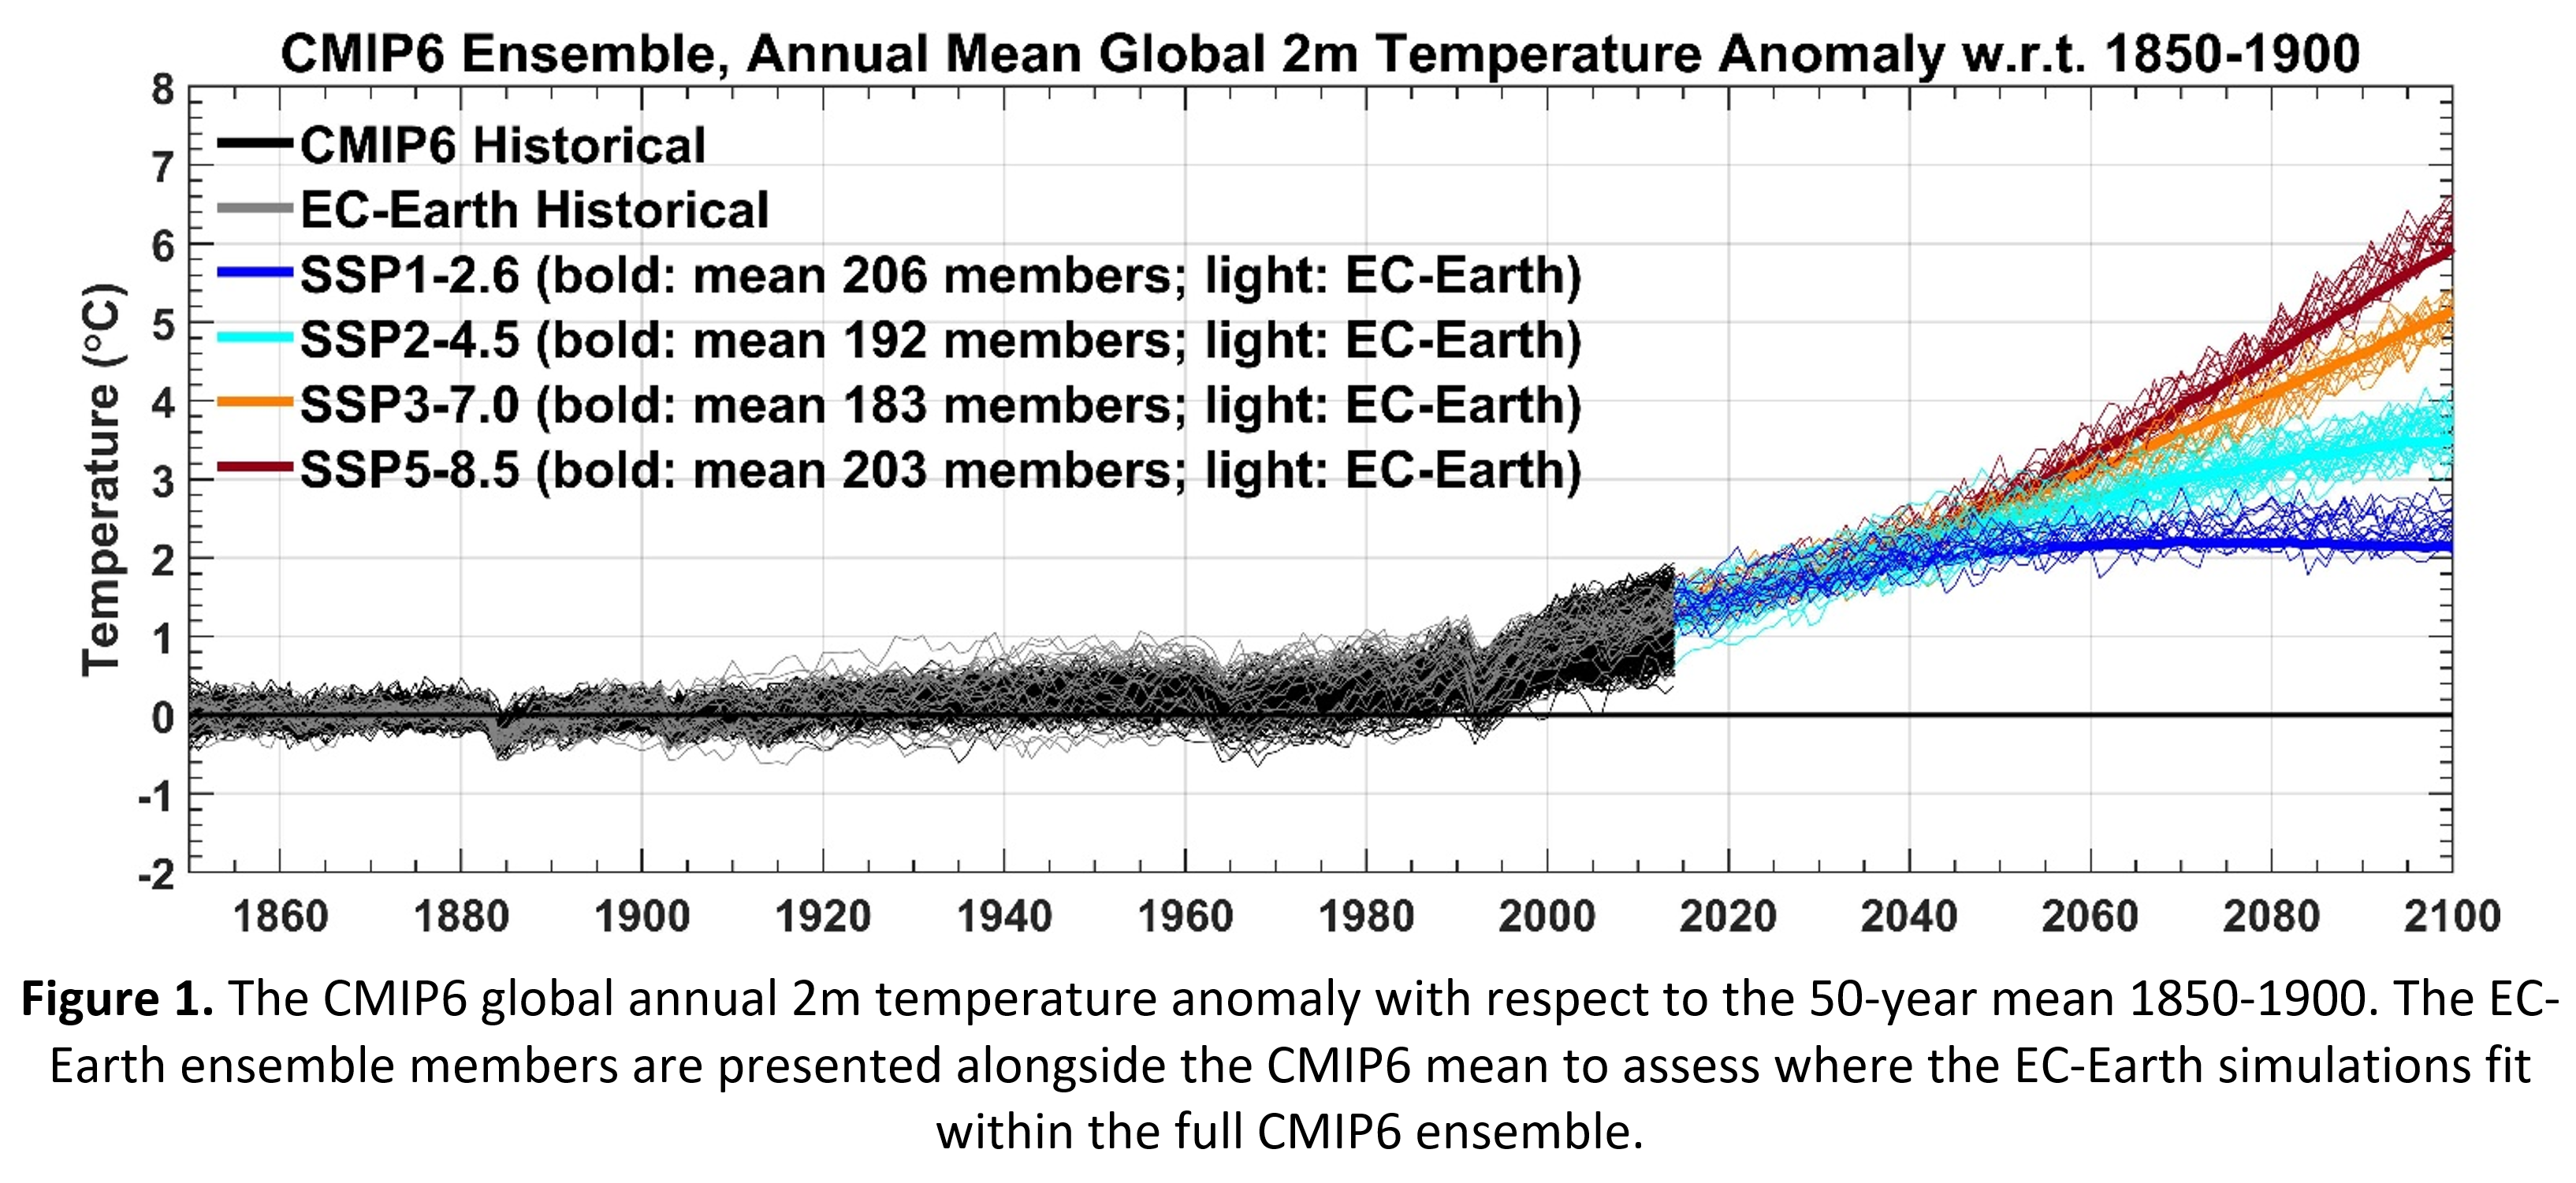 The CMIP6 global annual 2m temperature anomaly with respect to the 50-year mean 1850-1900. 